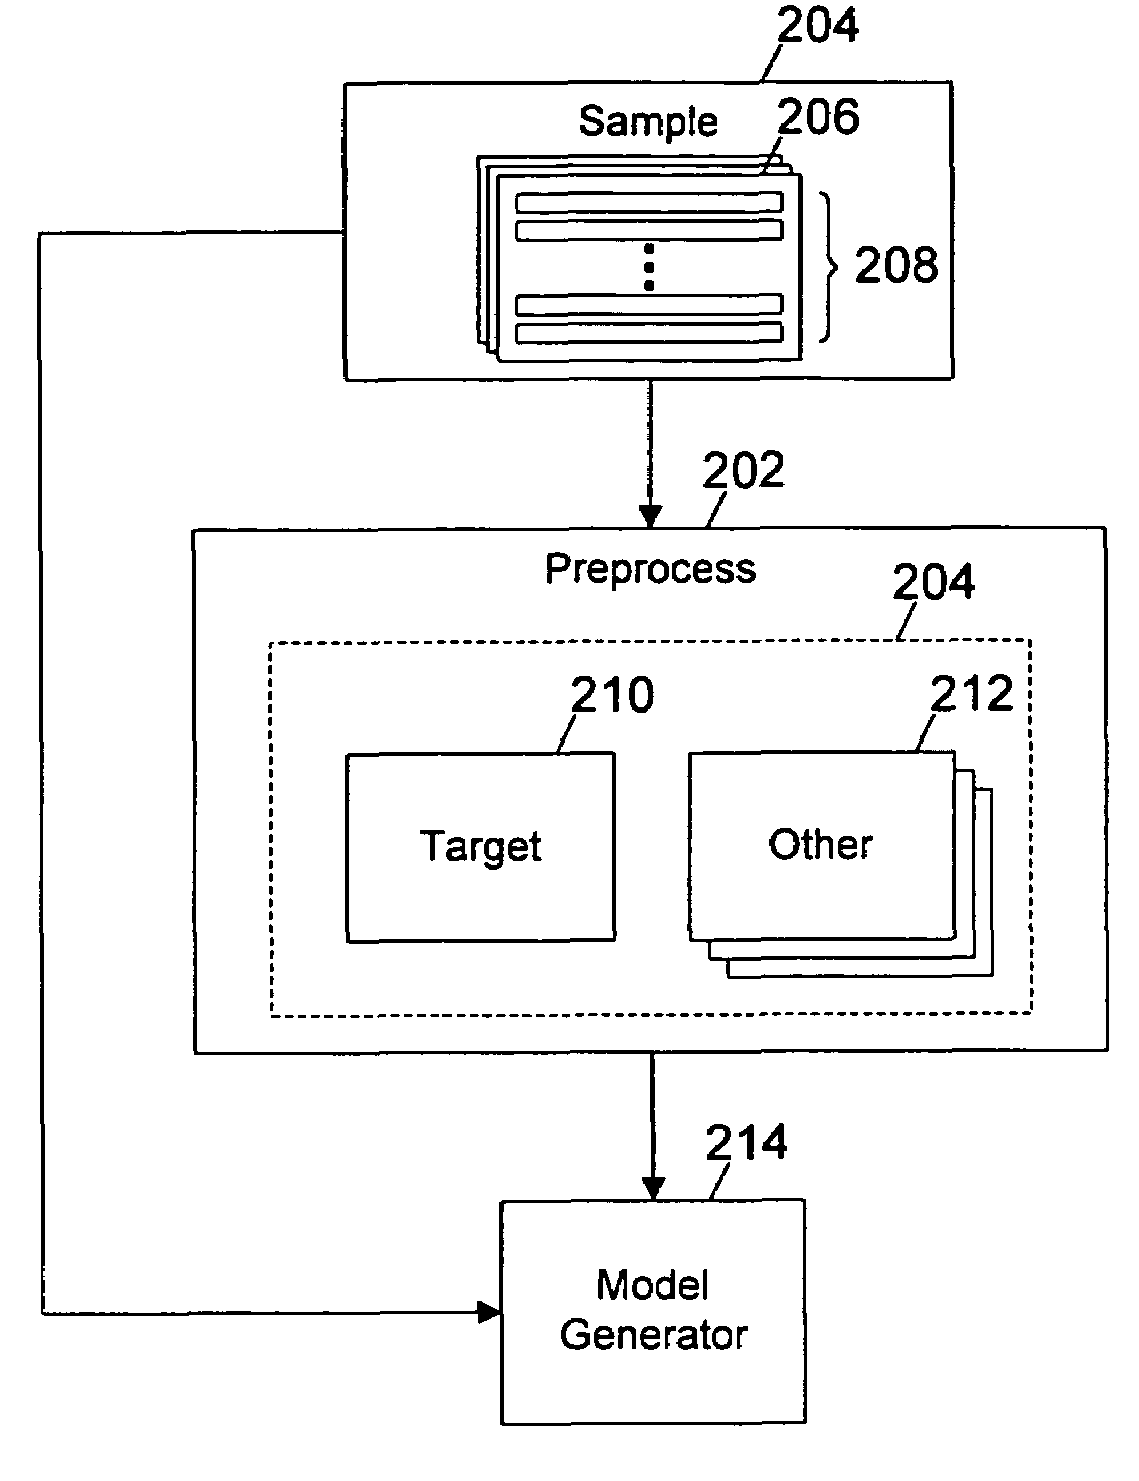 Method for computing models based on attributes selected by entropy